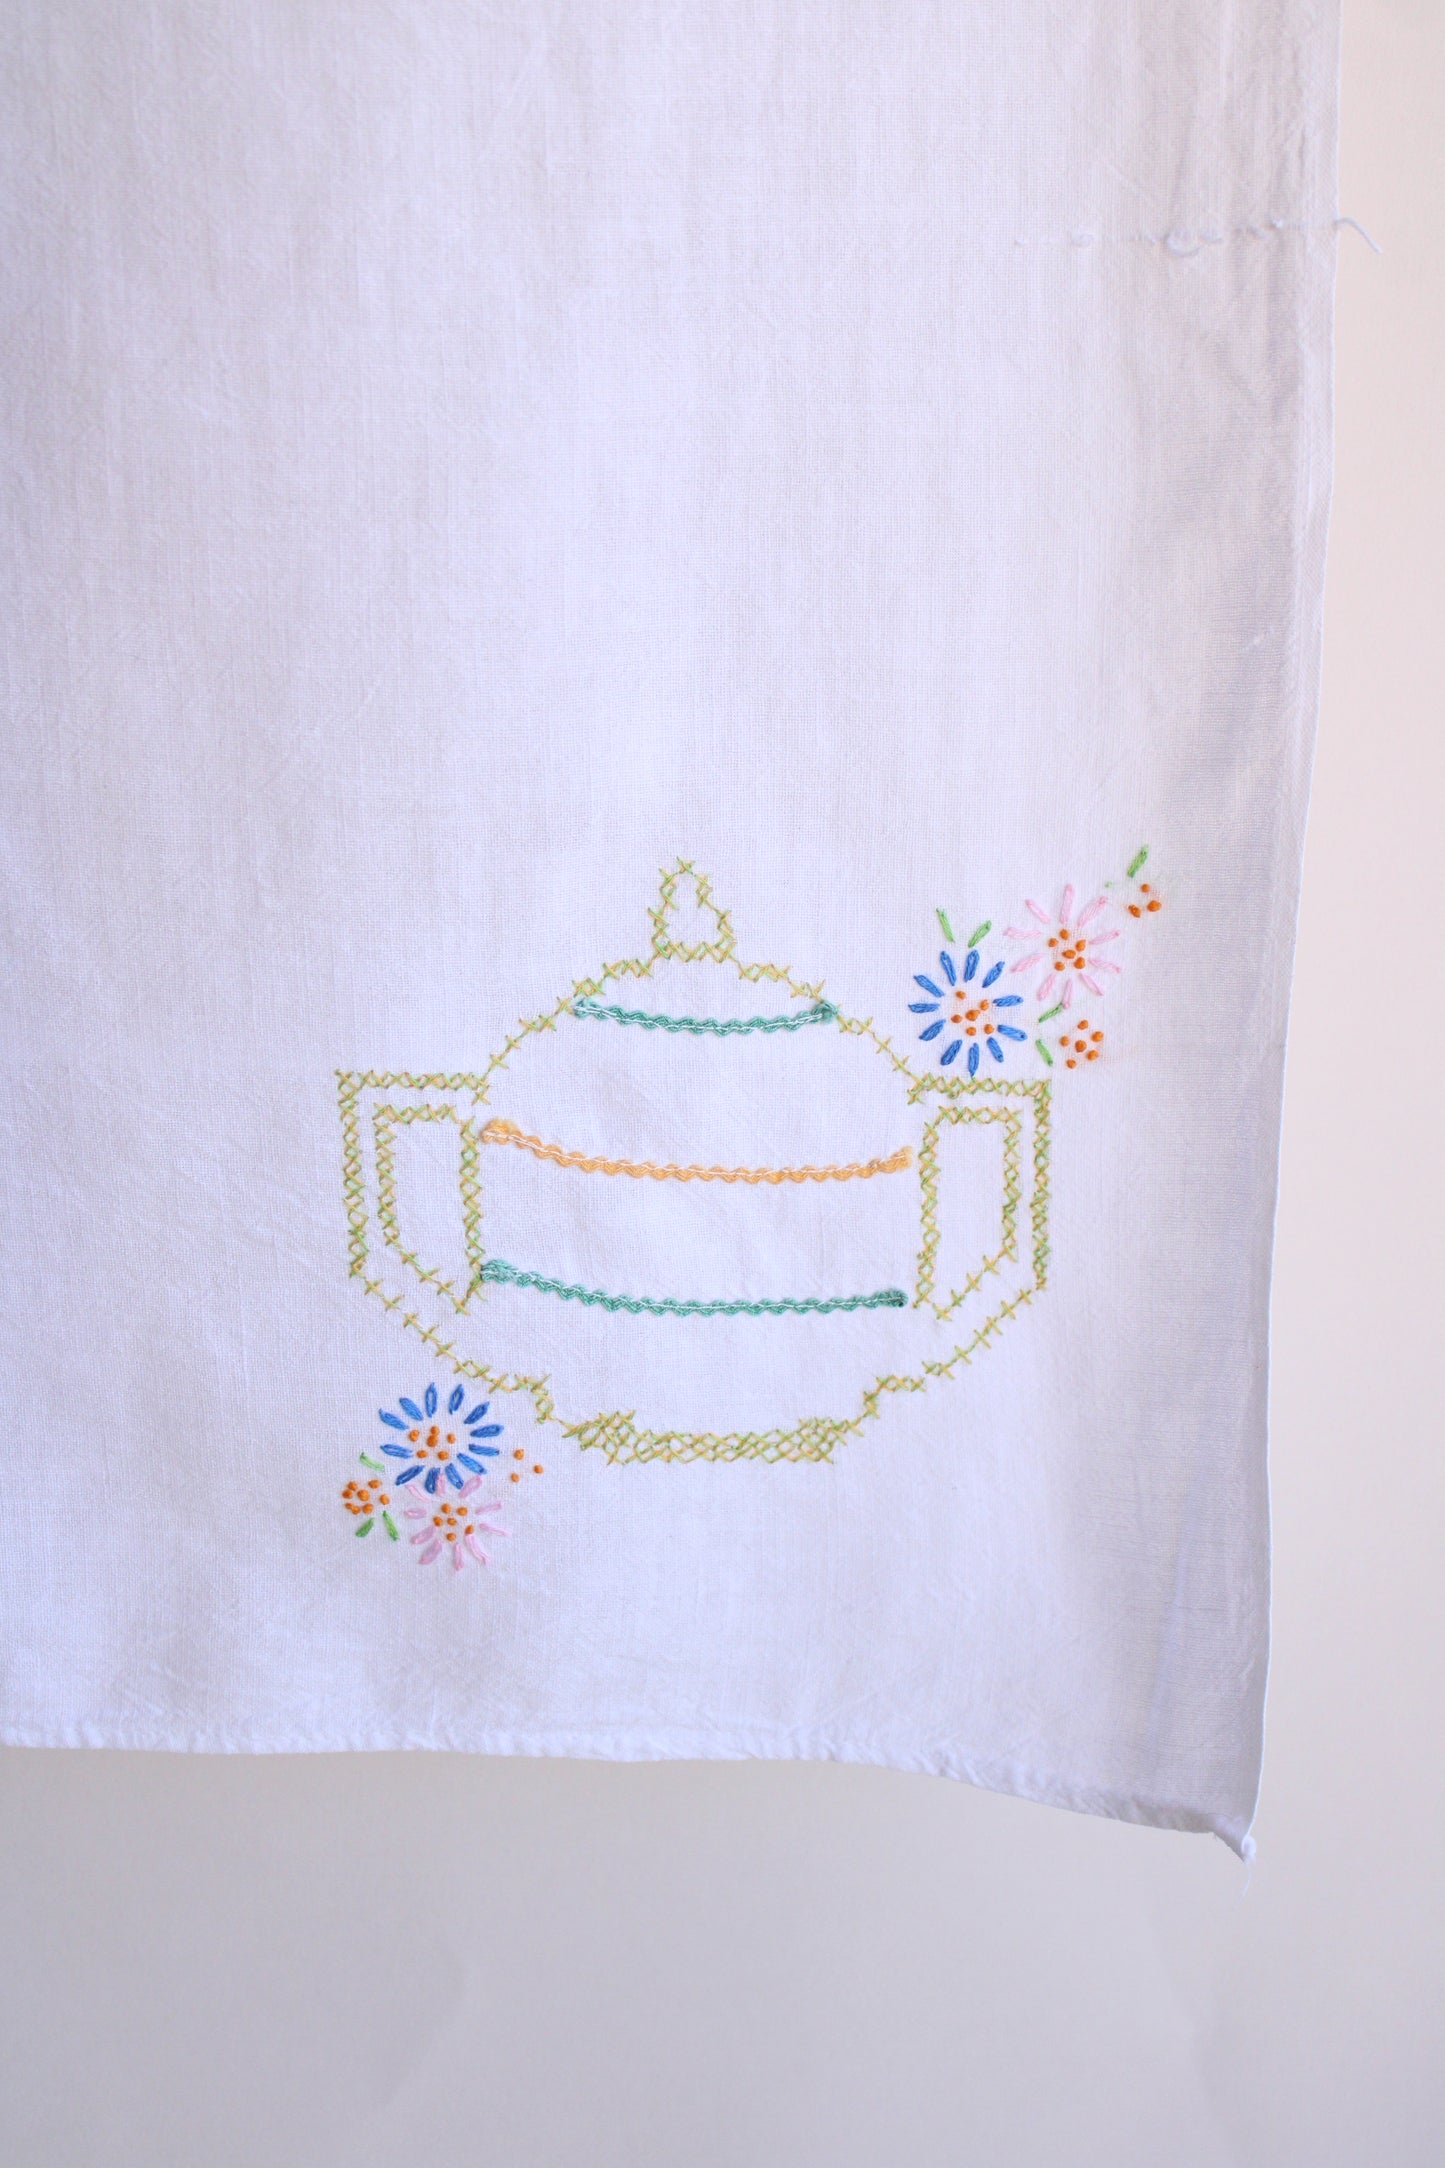 Vintage 1950s Feedsack Tablecloth with Teapot Cross-stitch